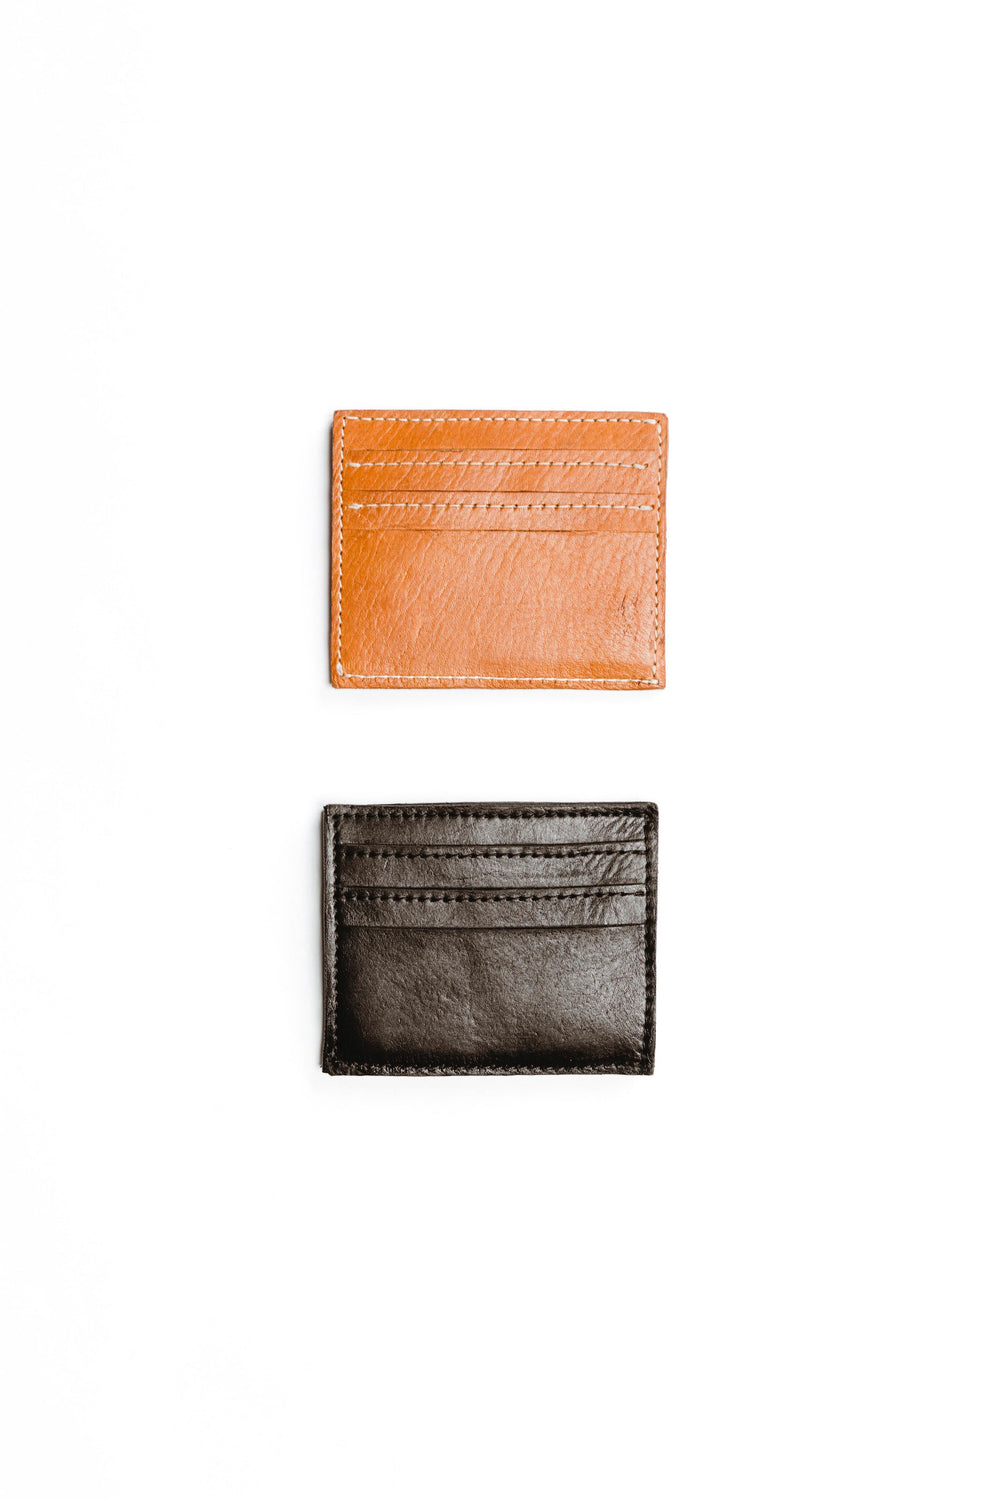 Minimalist Leather Wallet by 2nd Story Goods